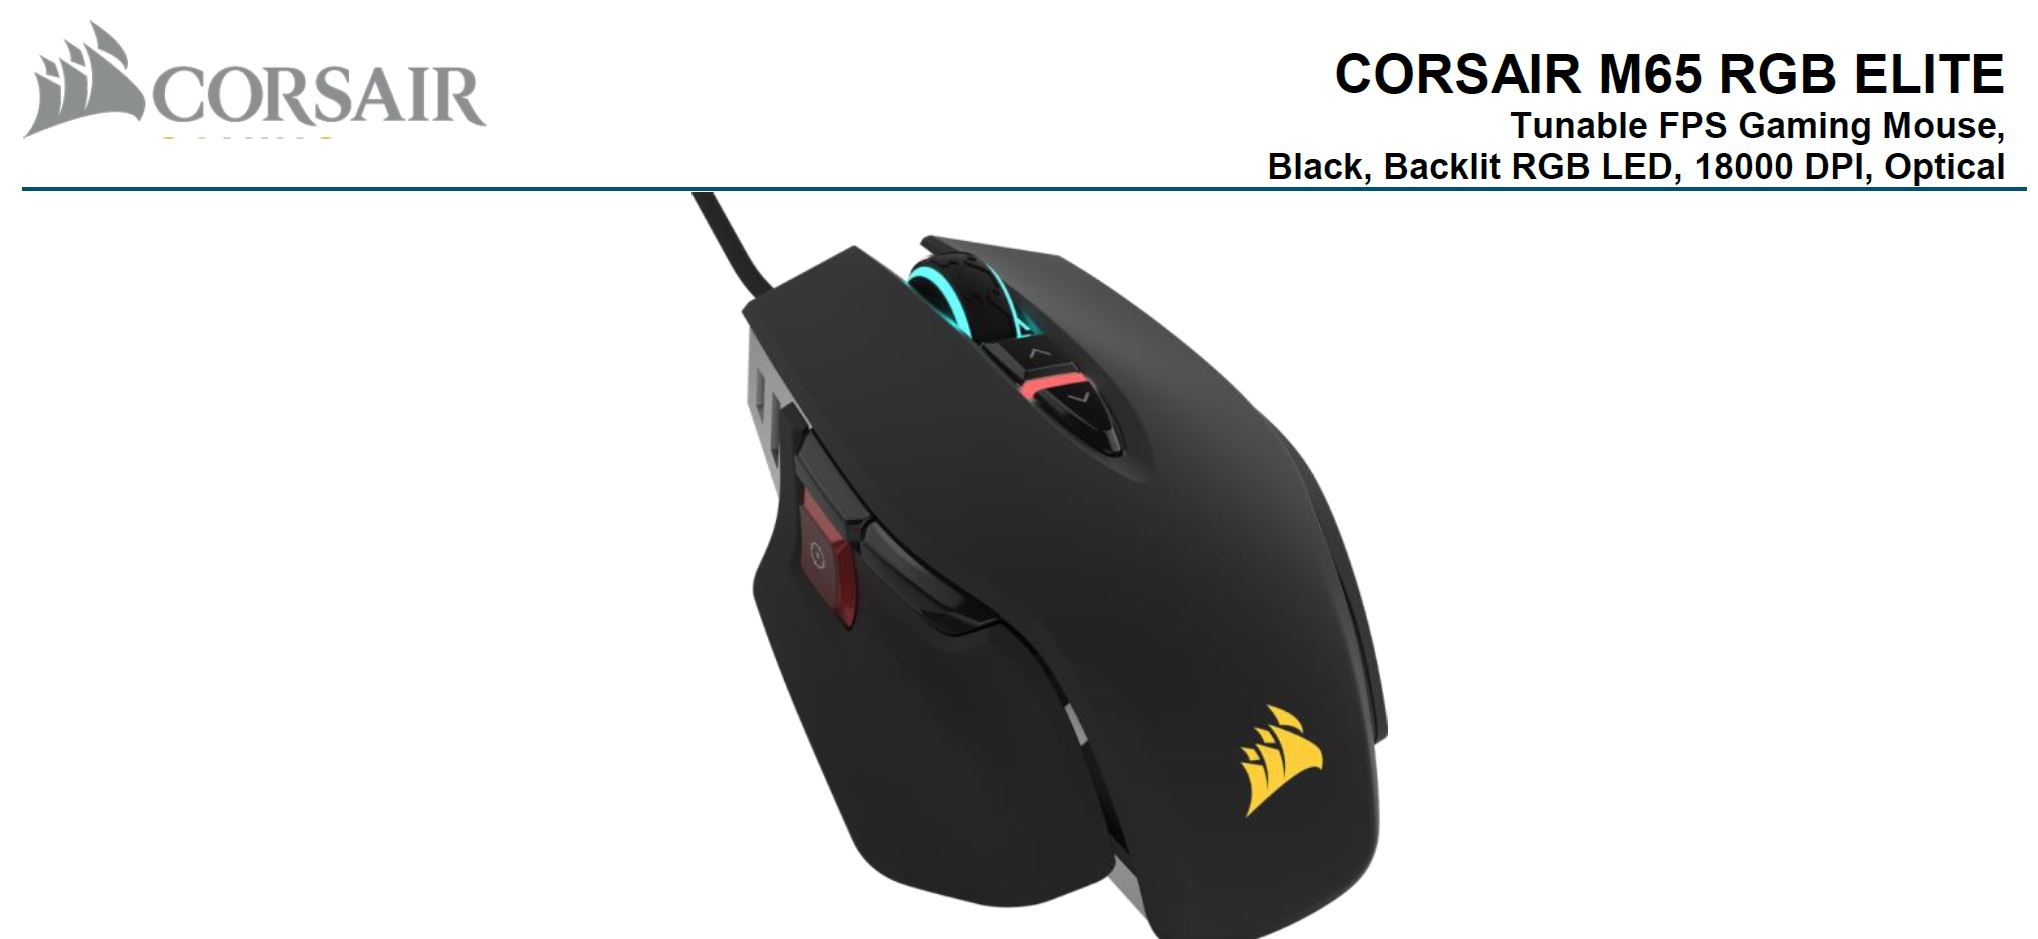 Corsair M65 RGB ELITE Tunable FPS Gaming Mouse Black, 18000 DPI, Optical, iCUE Software.